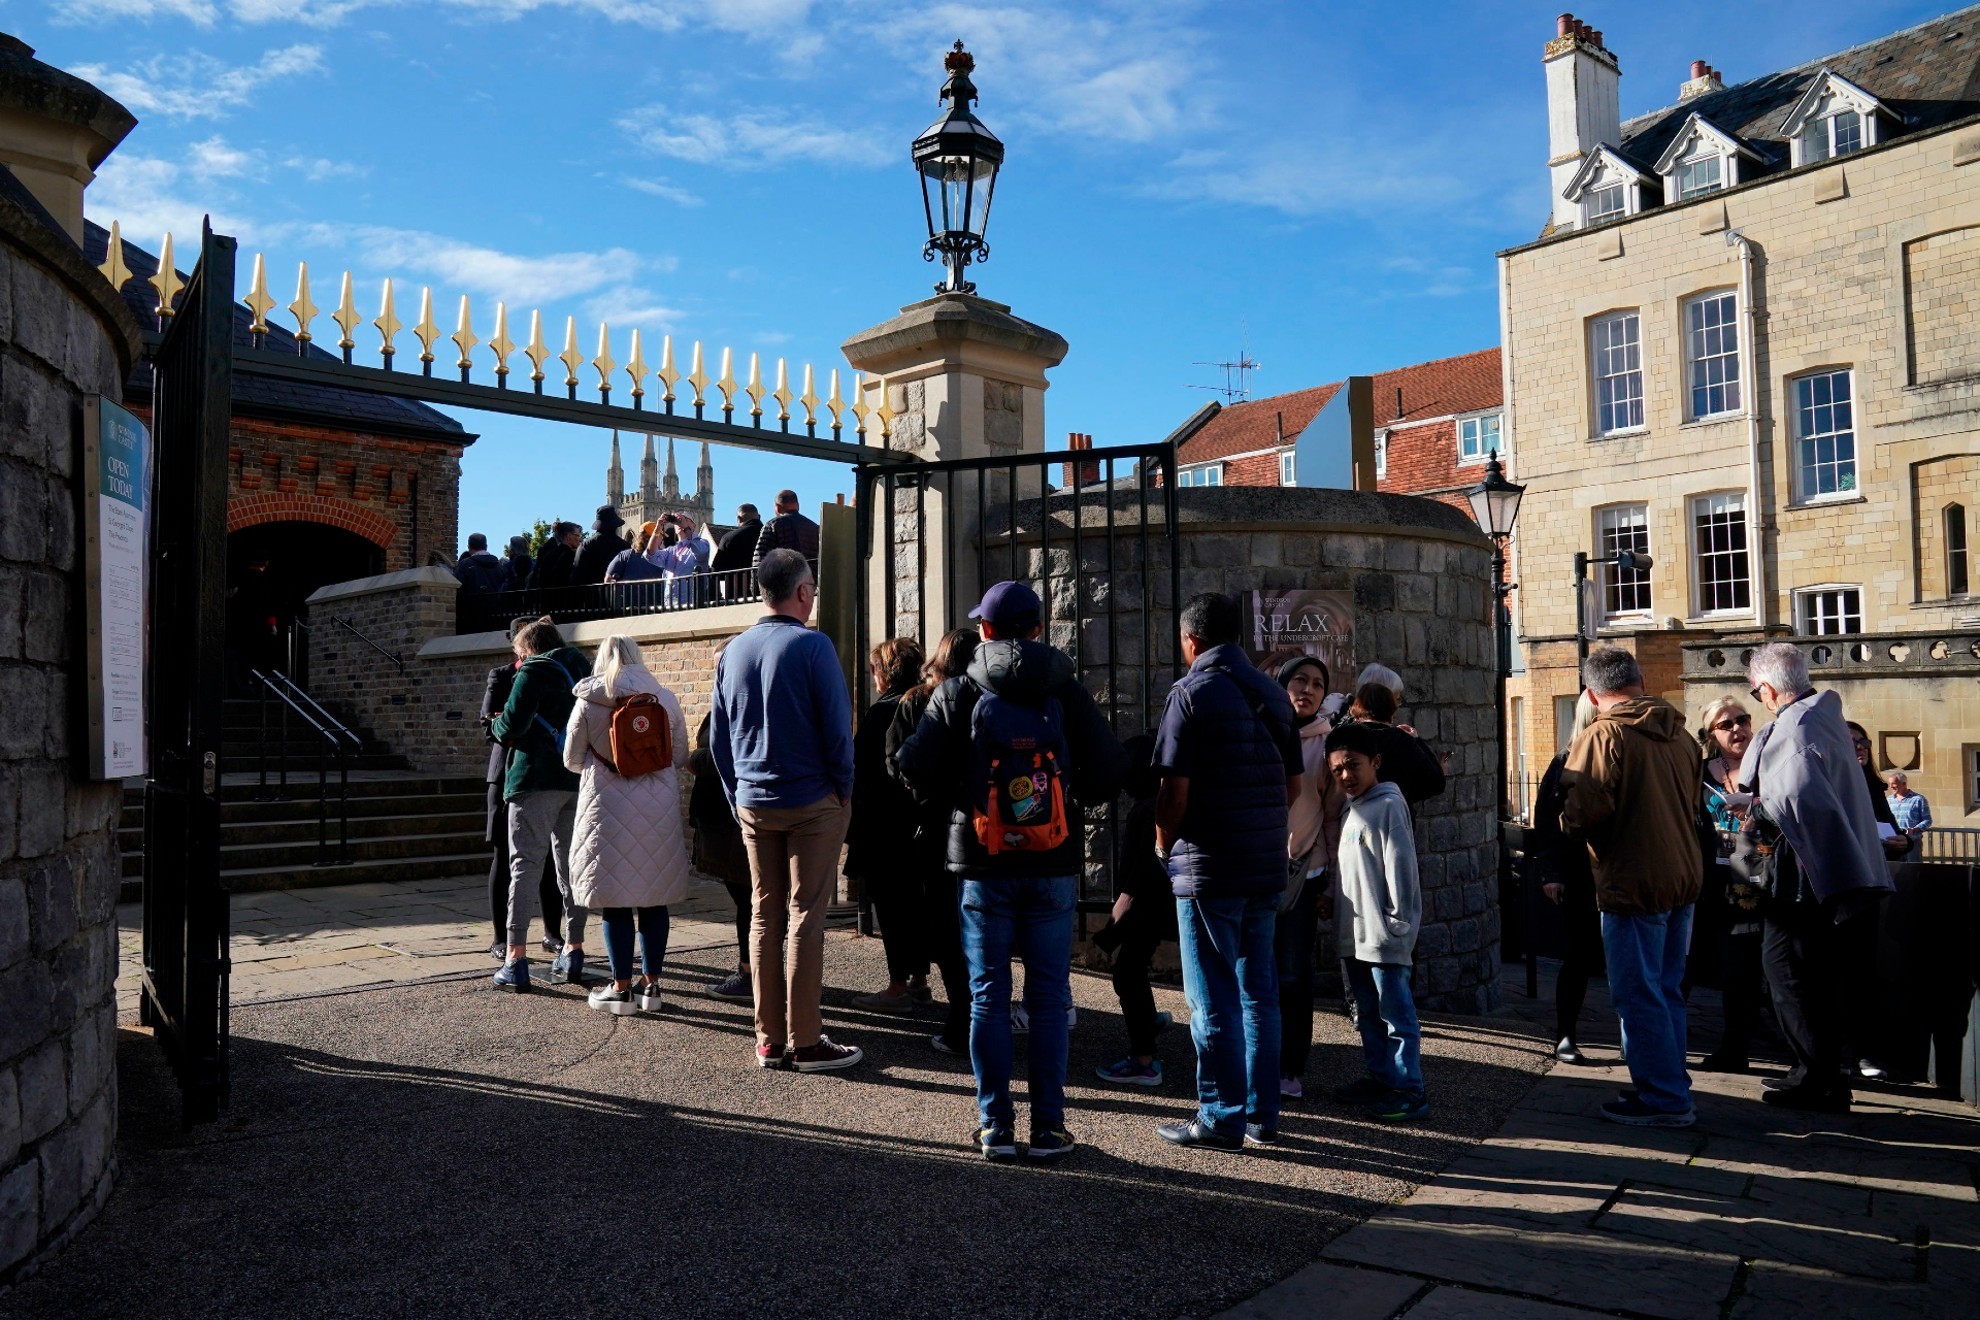 People queue outside as Windsor Castle and St George's Chapel. / AP